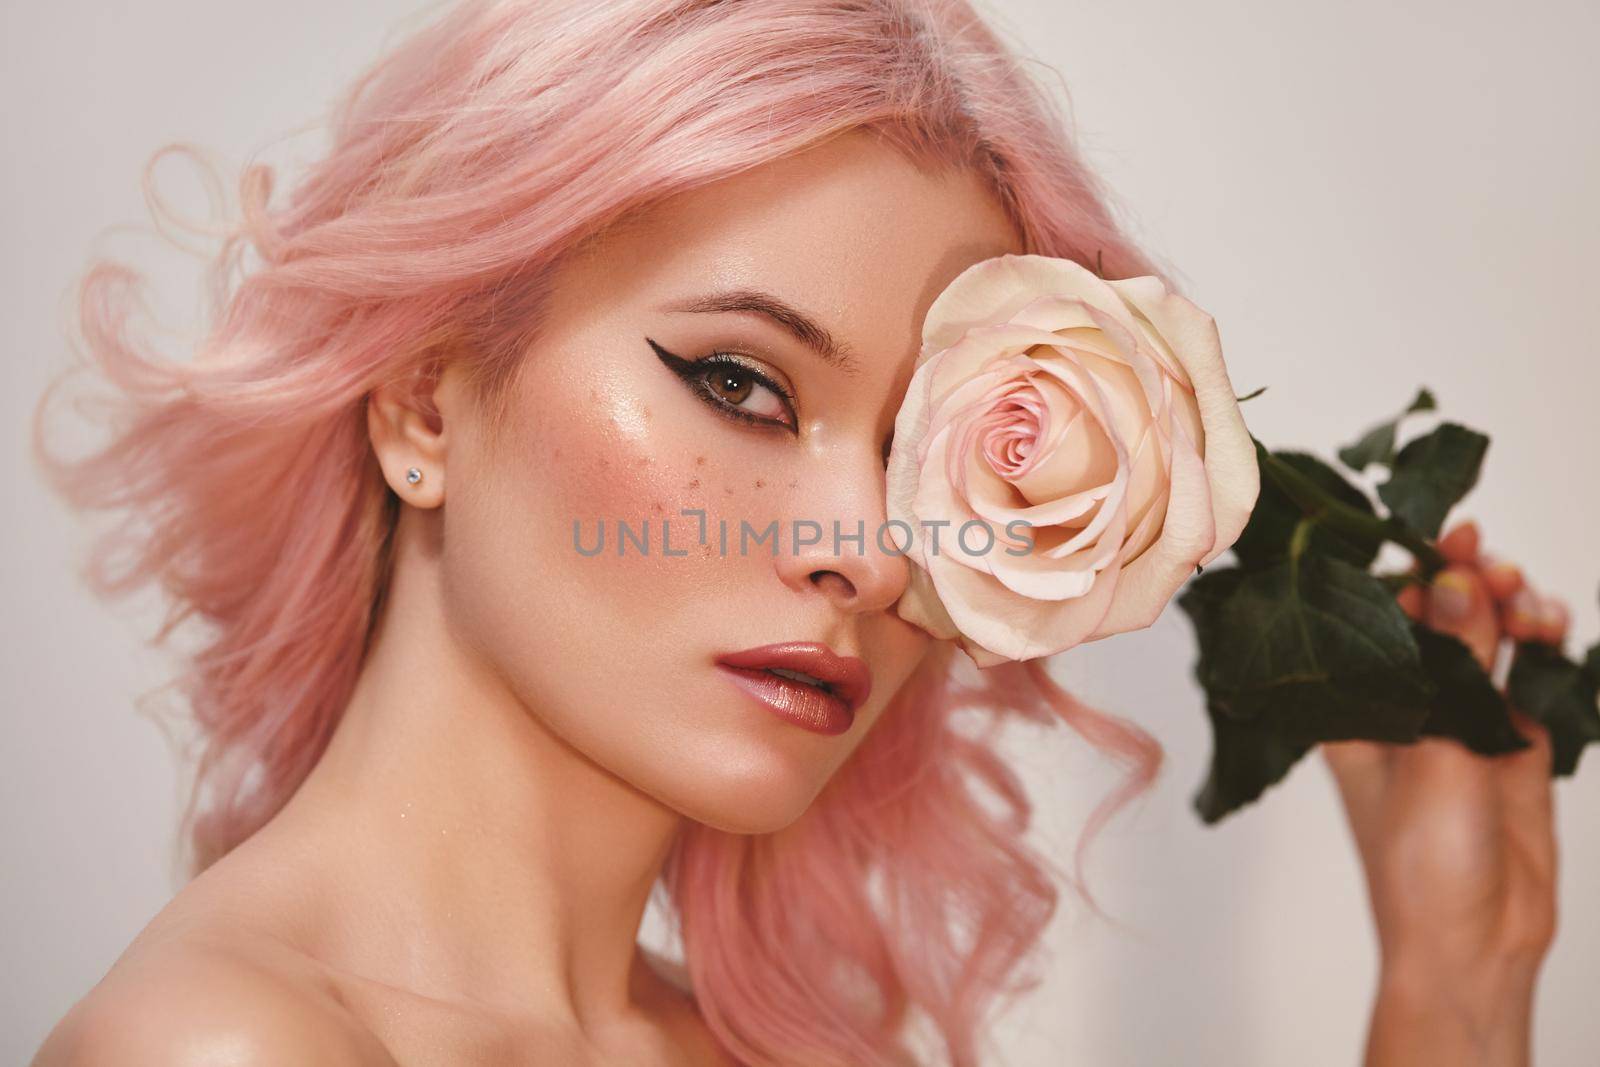 Soft-Girl Style with Trend Pink Flying Hair, Fashion Make-up. Woman Face with Fake Freckles and Rose Flowers. Blonde Female Model with perfect Fresh Clean Skin, Blush Rouge